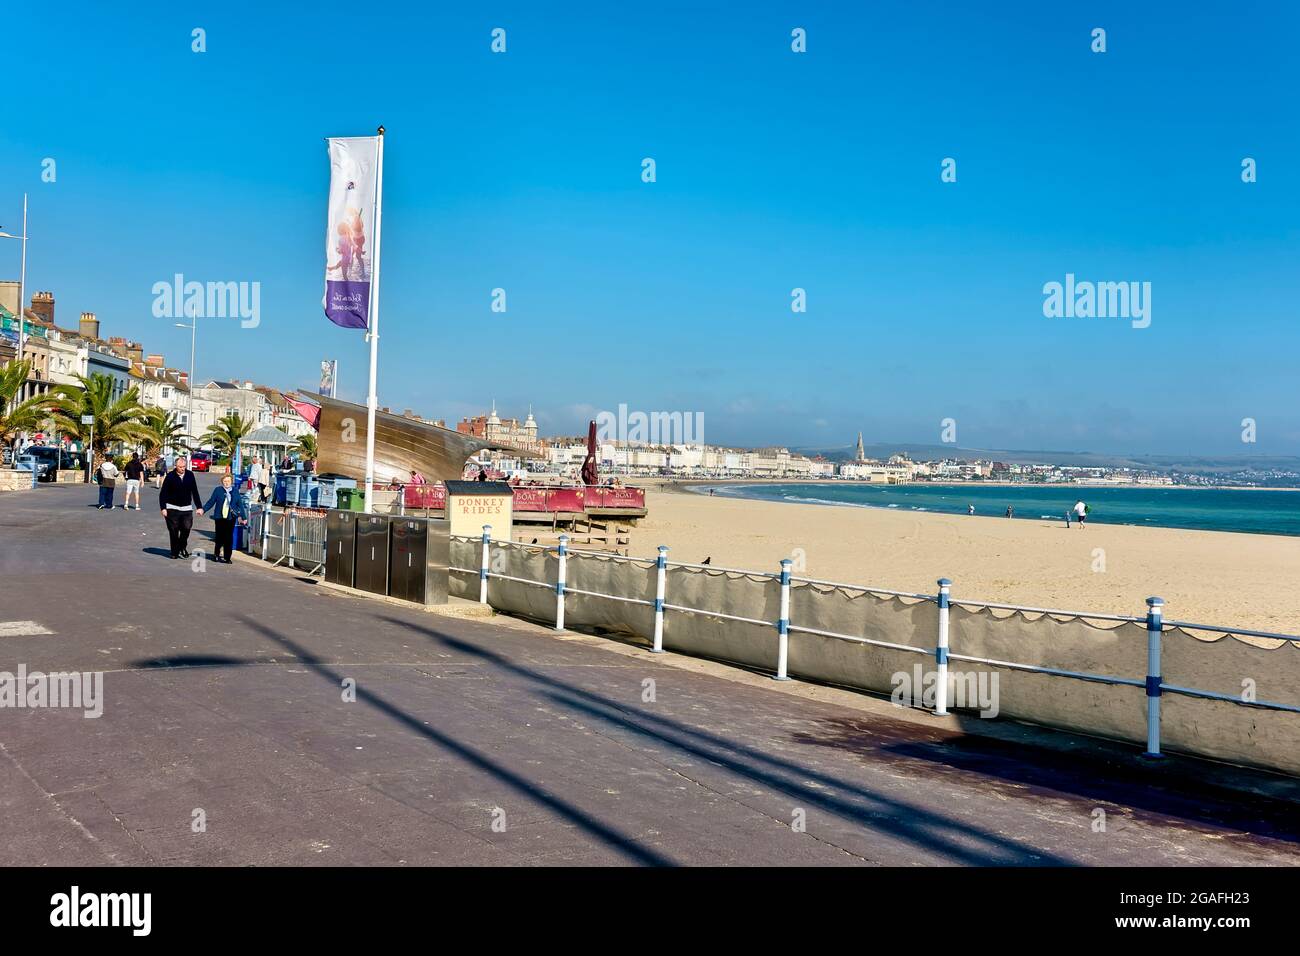 Weymouth, Dorset, UK - October 10 2018: People walking on an almost deserted Weymouth Promenade and beach in Dorset, England, UK Stock Photo